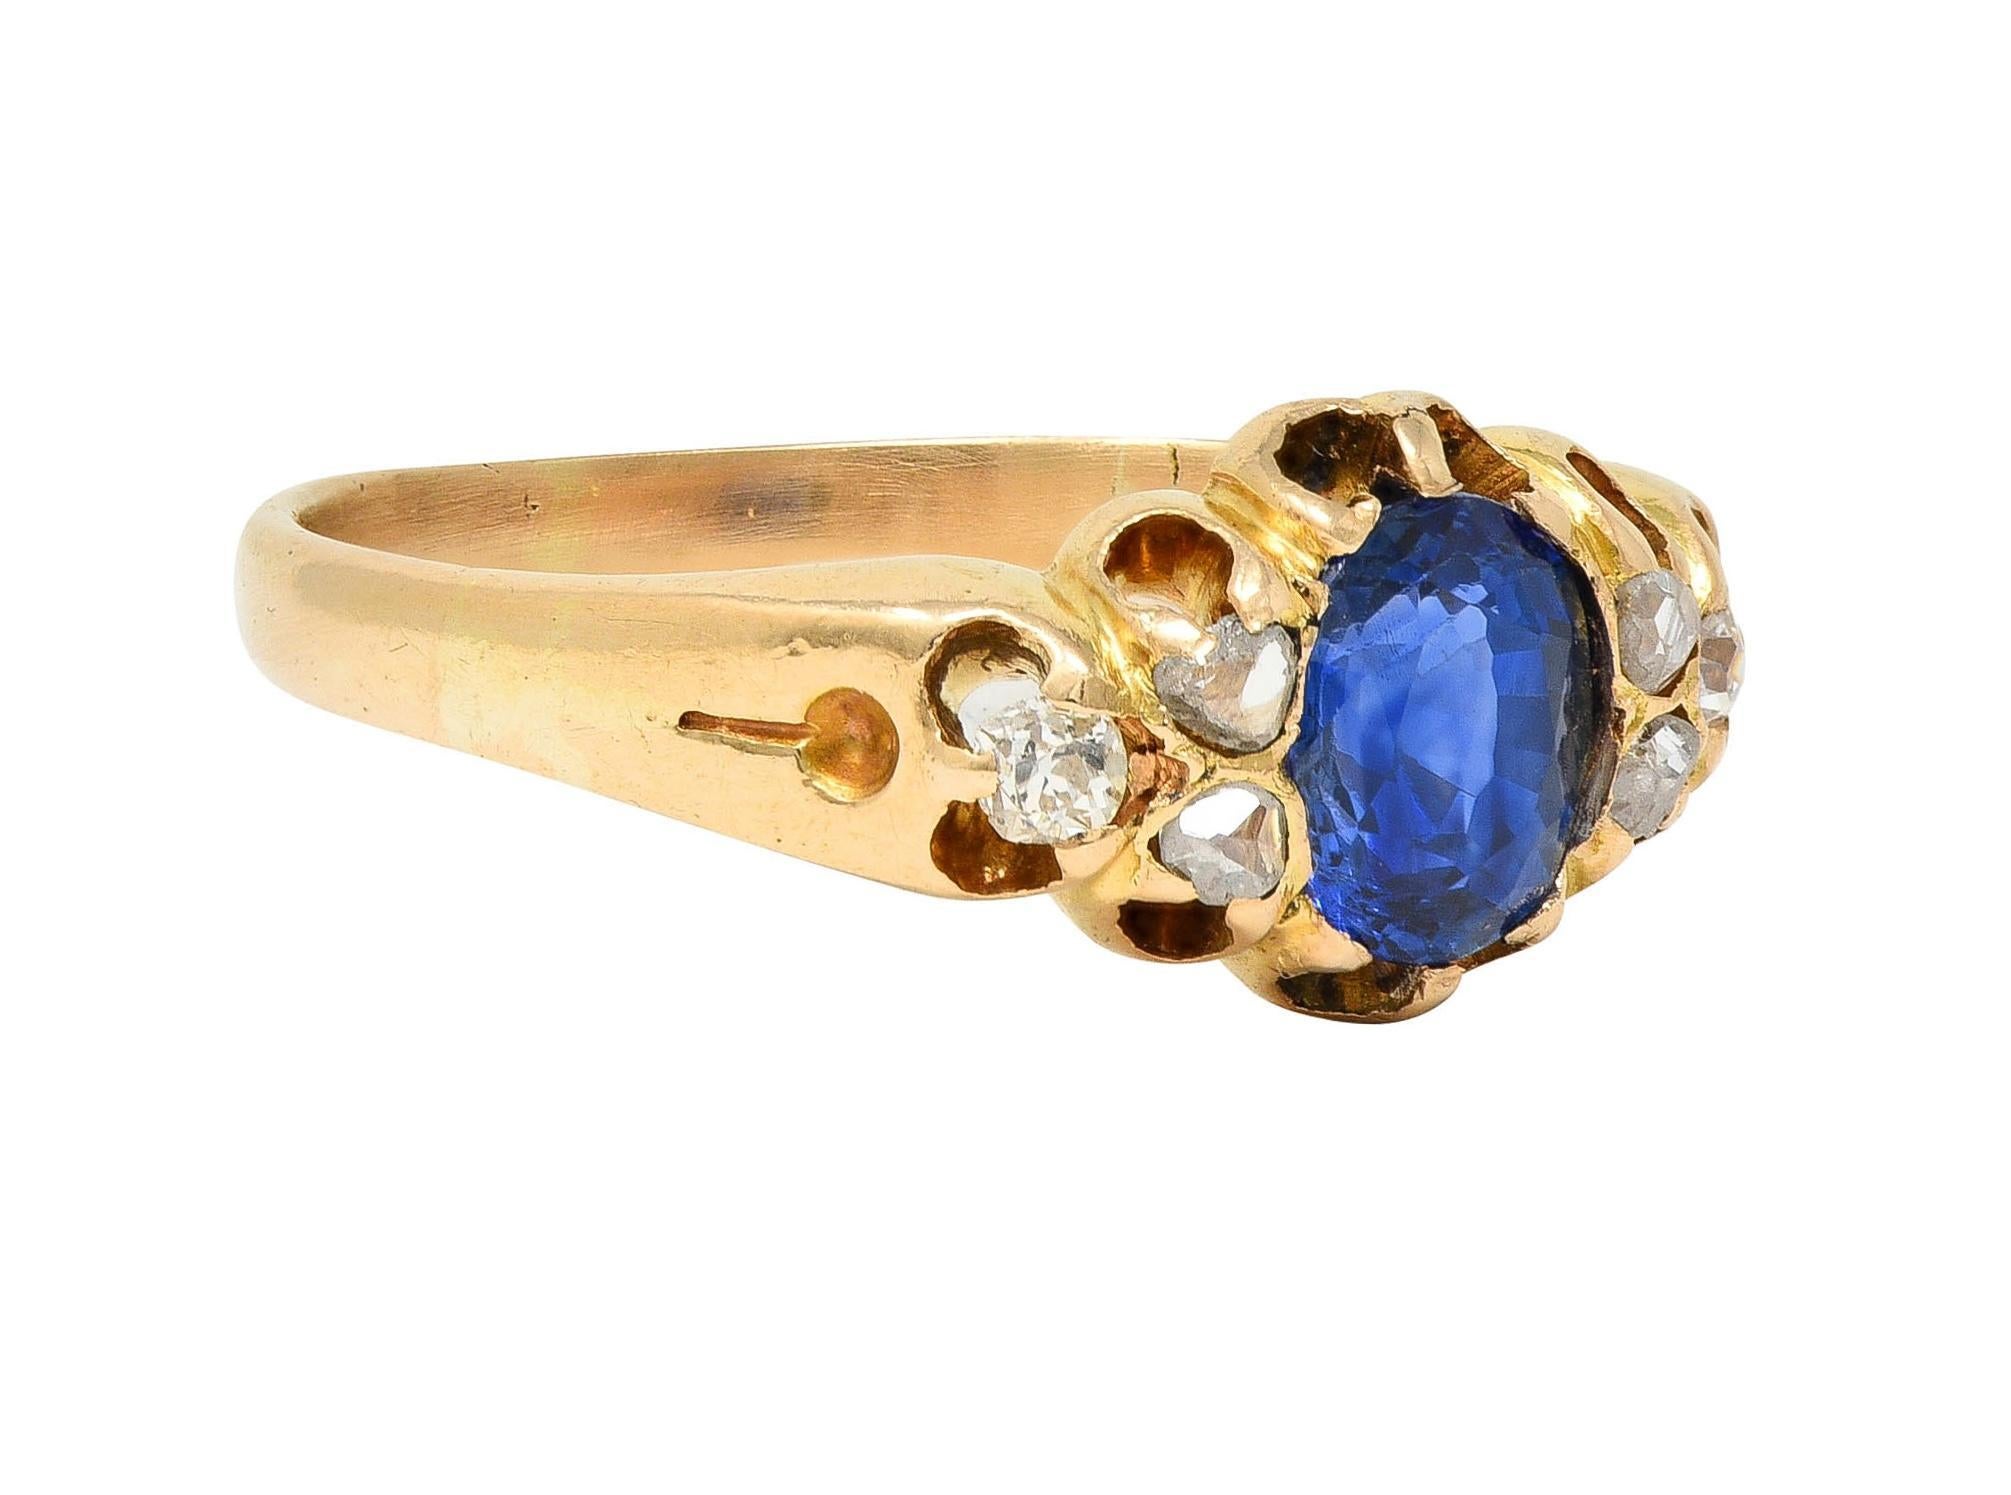 Centering a cushion-shaped sapphire weighing approximately 1.12 carats total - transparent medium blue 
Set with belcher style prongs and flanked by clustered of old mine and rose cut diamonds
Weighing approximately 0.18 carat total - quality